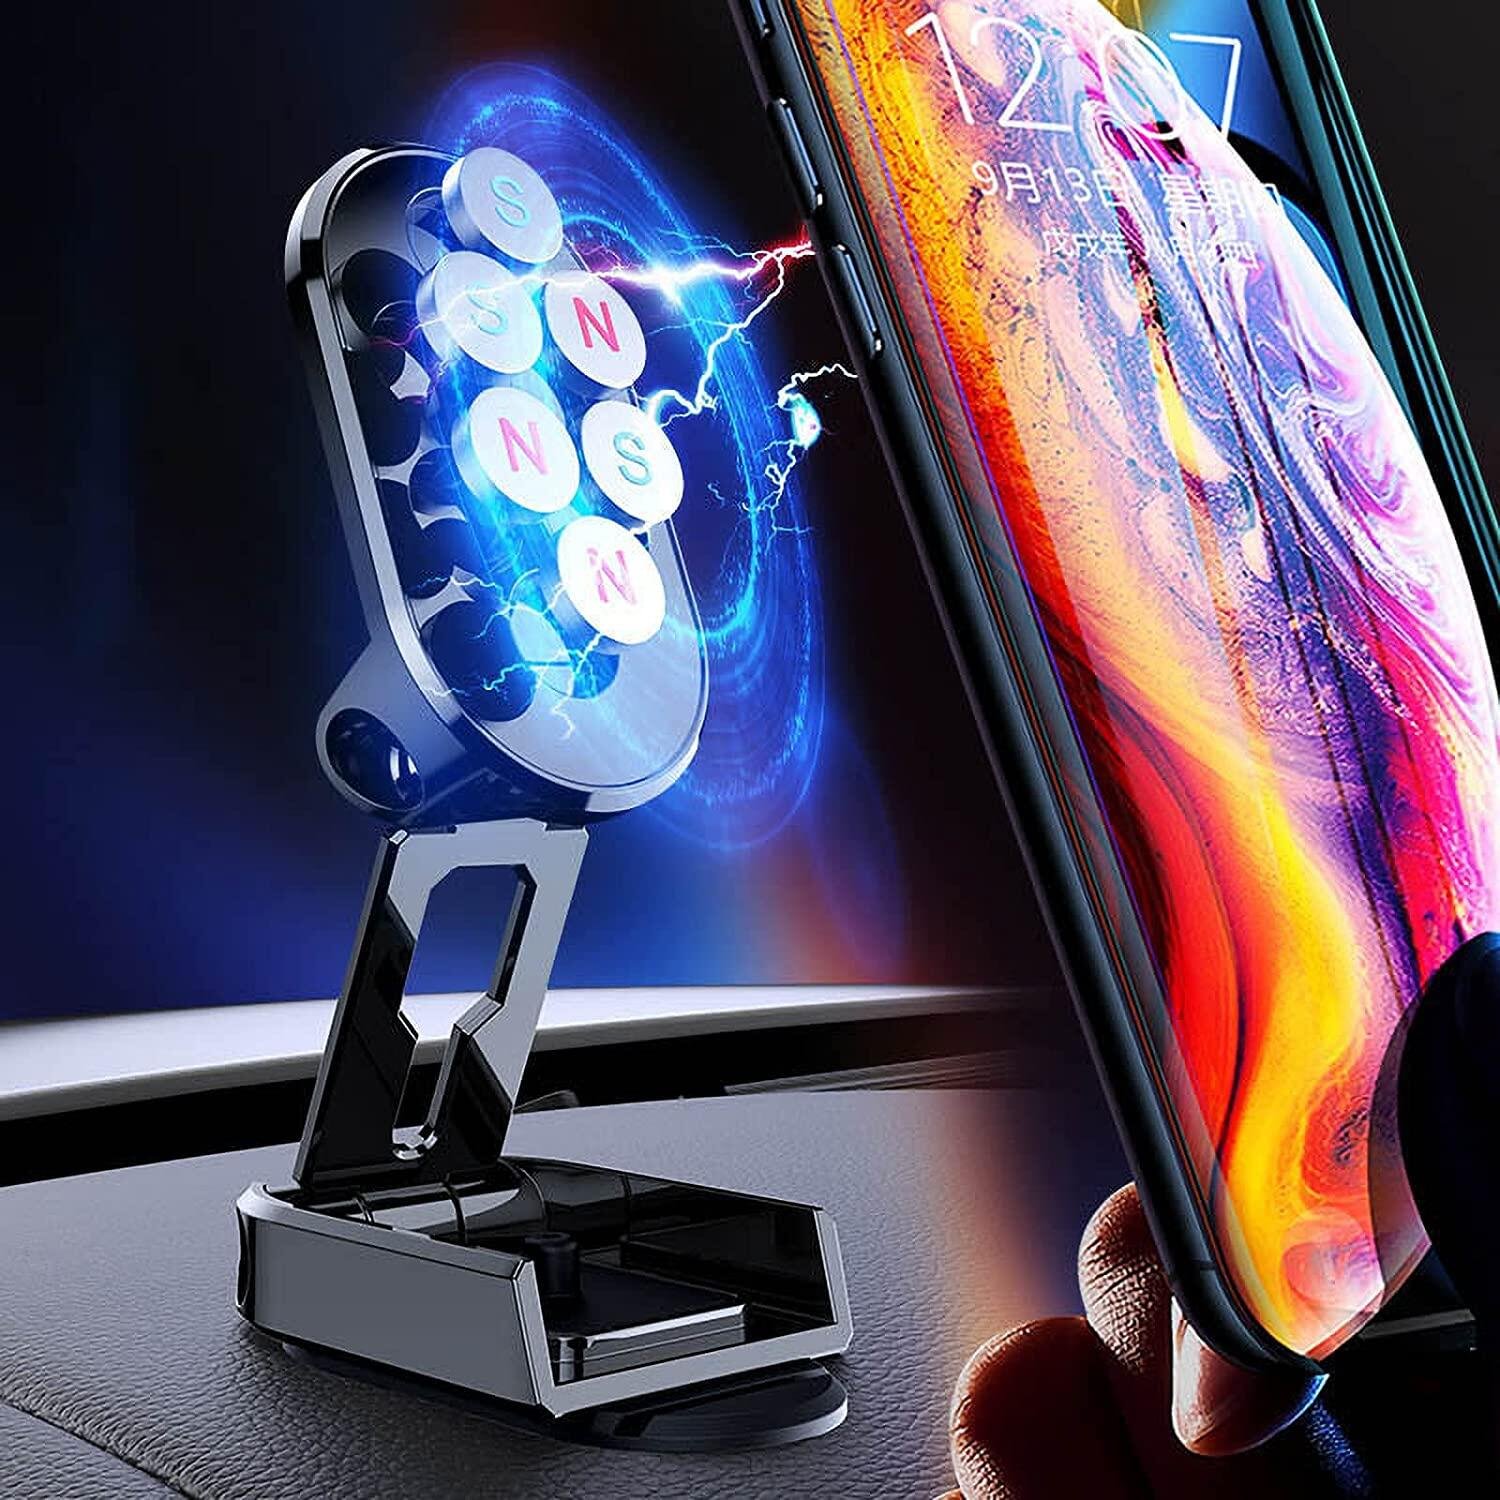 (Early Christmas Sale- 48% OFF) 360° Rotating Folding Magnetic Car Phone Holder- Buy 2 Get Extra 10% Off